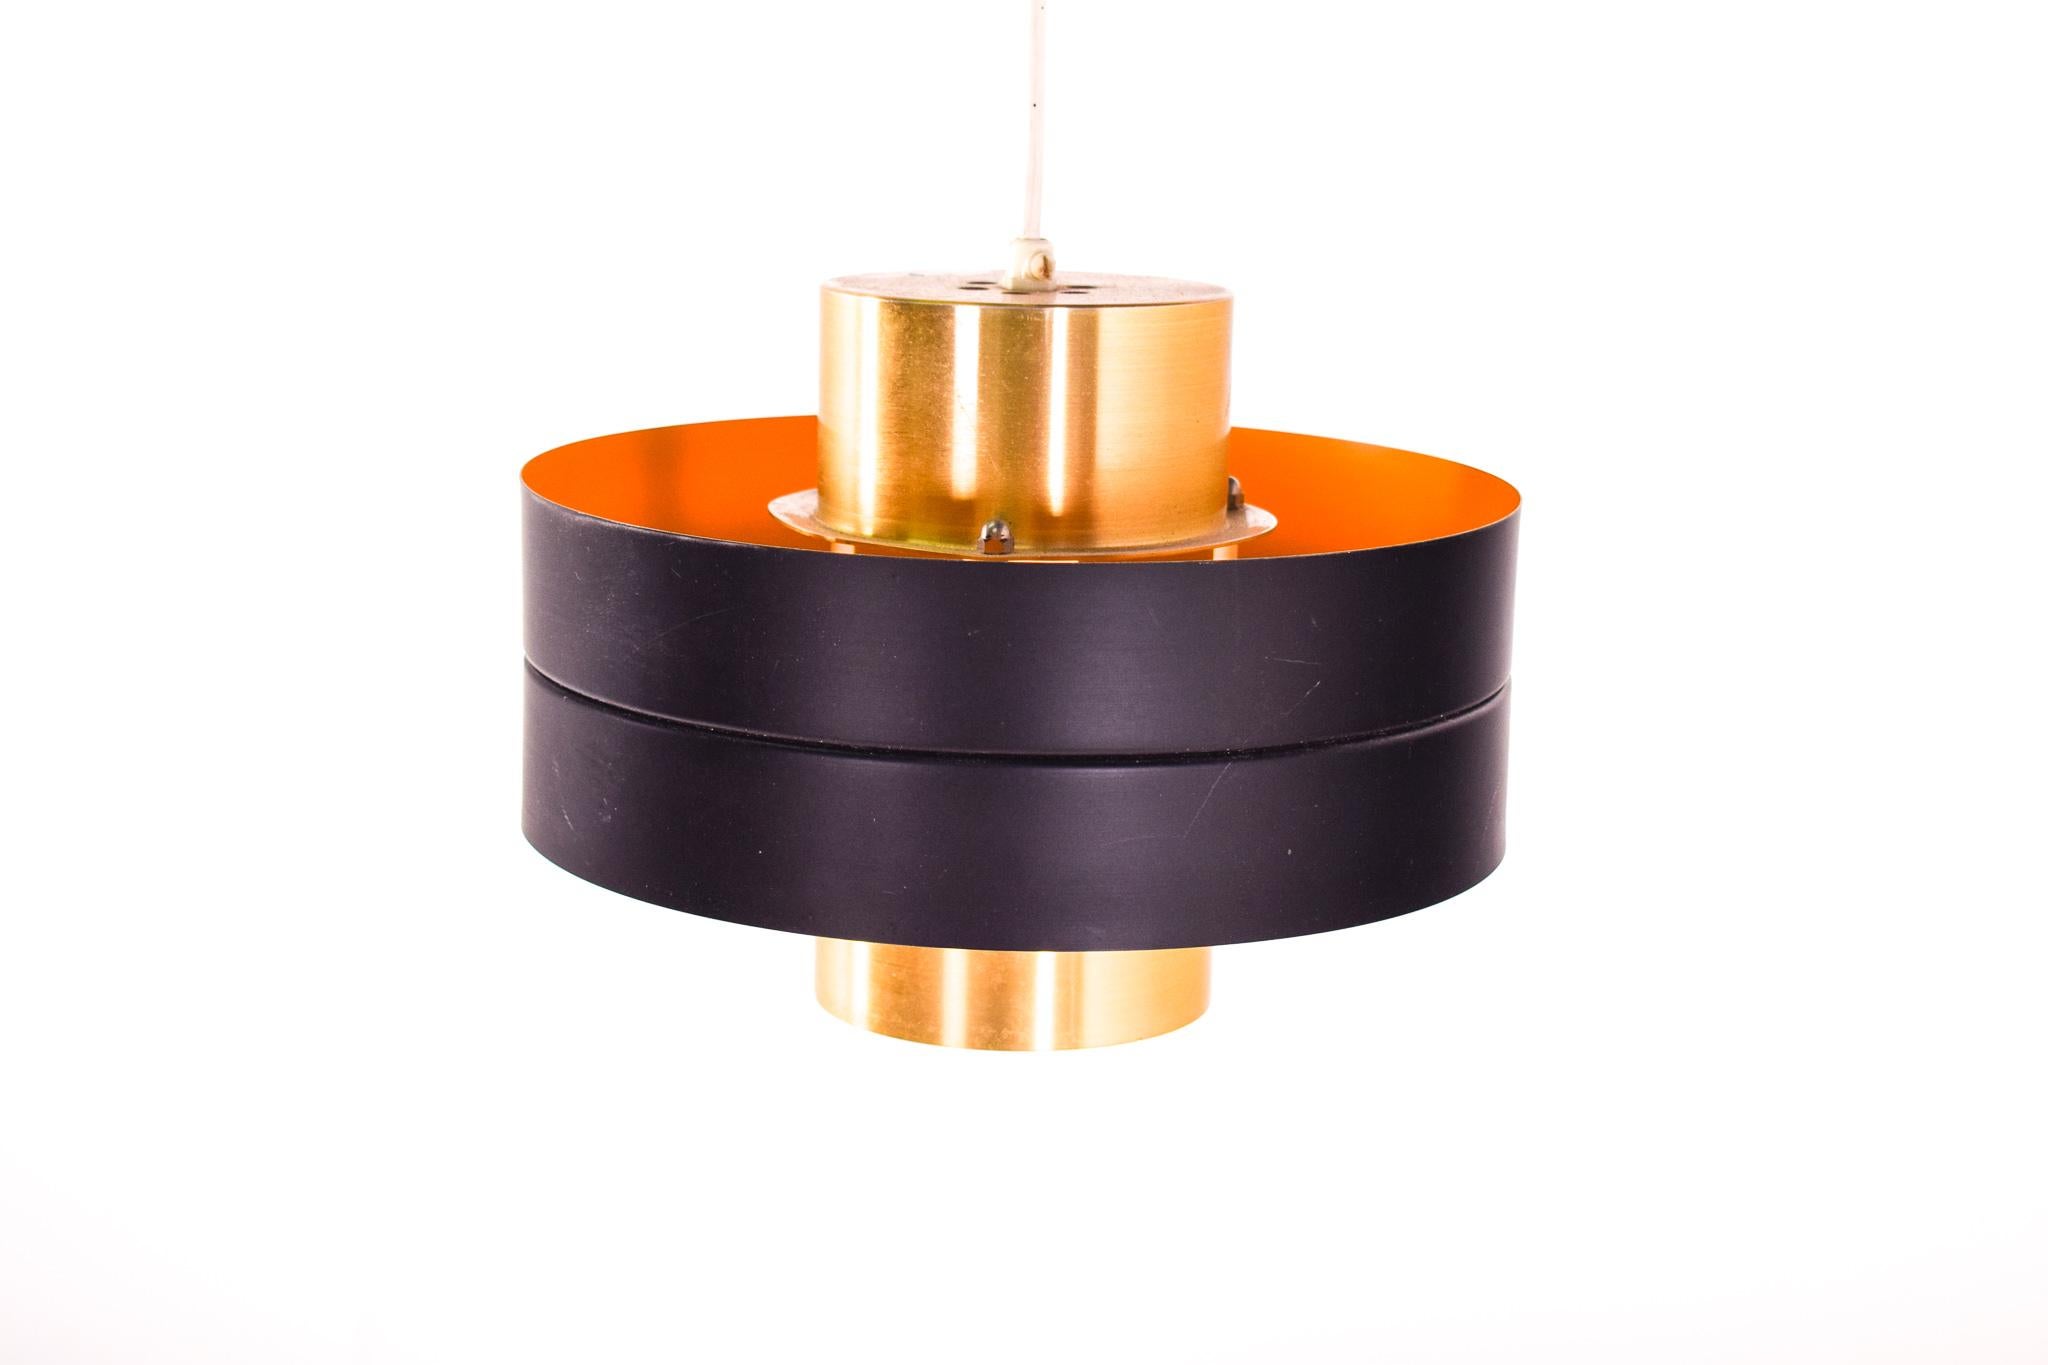 The lamp consists of two aluminium lacquered in brass shades with a black band that runs around the middle. The interior is painted on yellow, which gives it a warm color when switched on. This Danish pendant lamp very reminiscent to those lamps